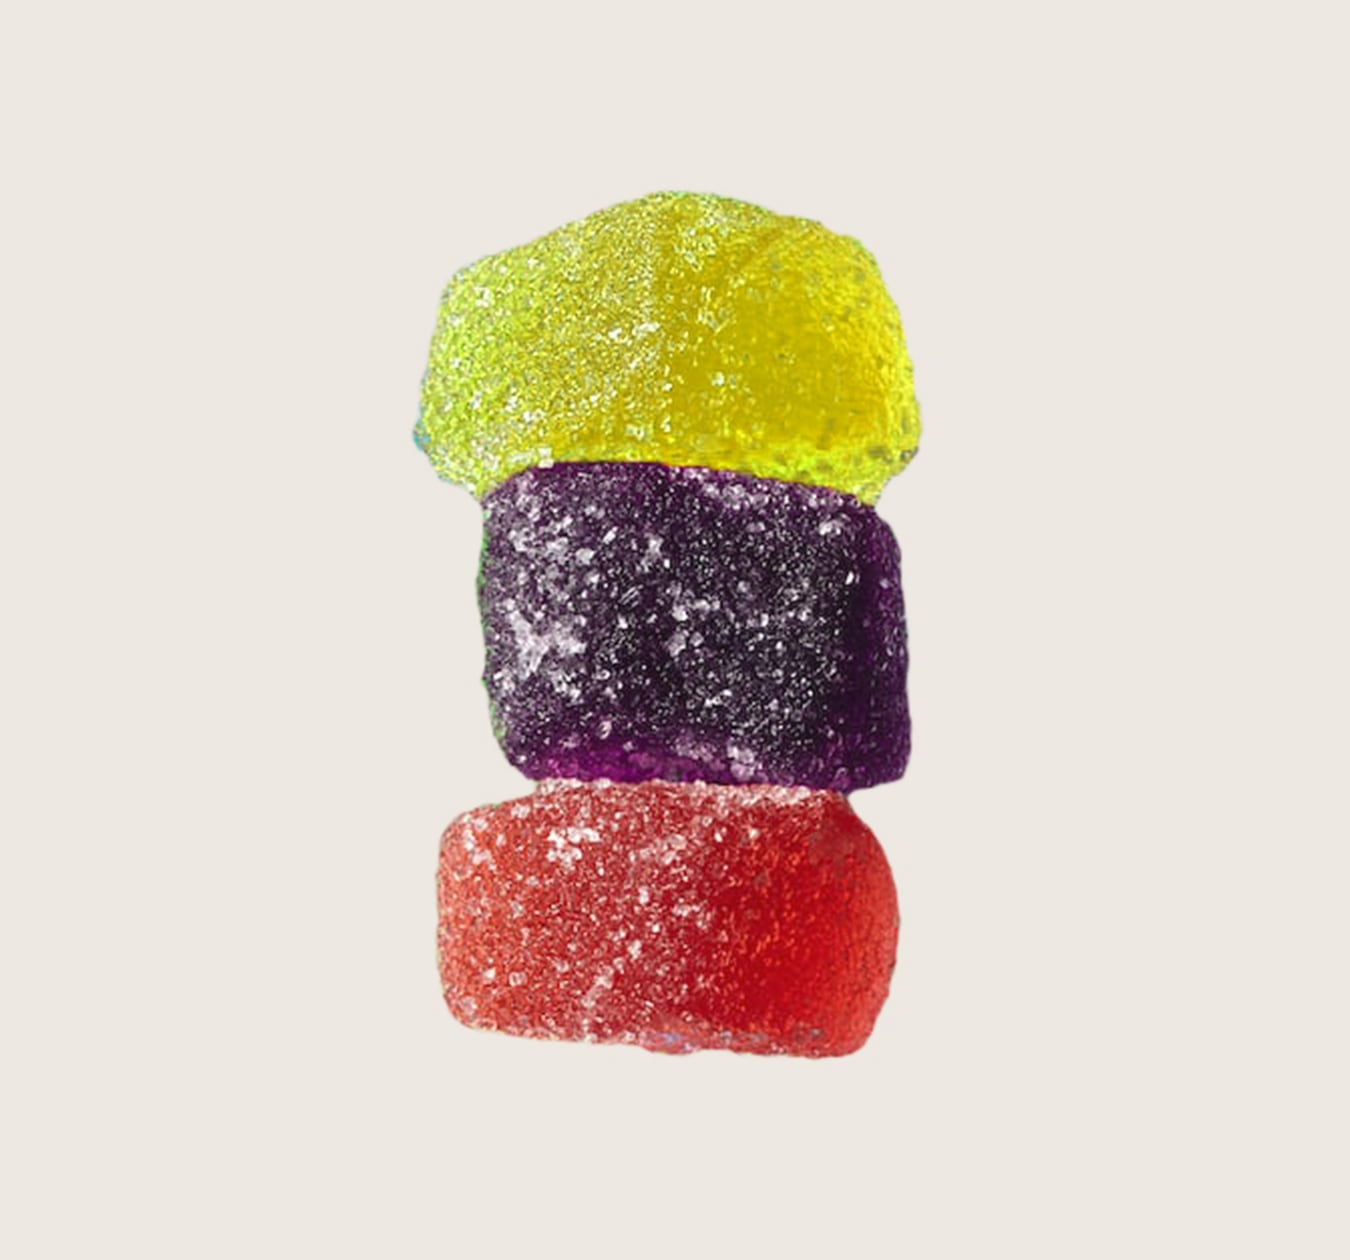 Chillout 25mg Delta 8 THC Gummies